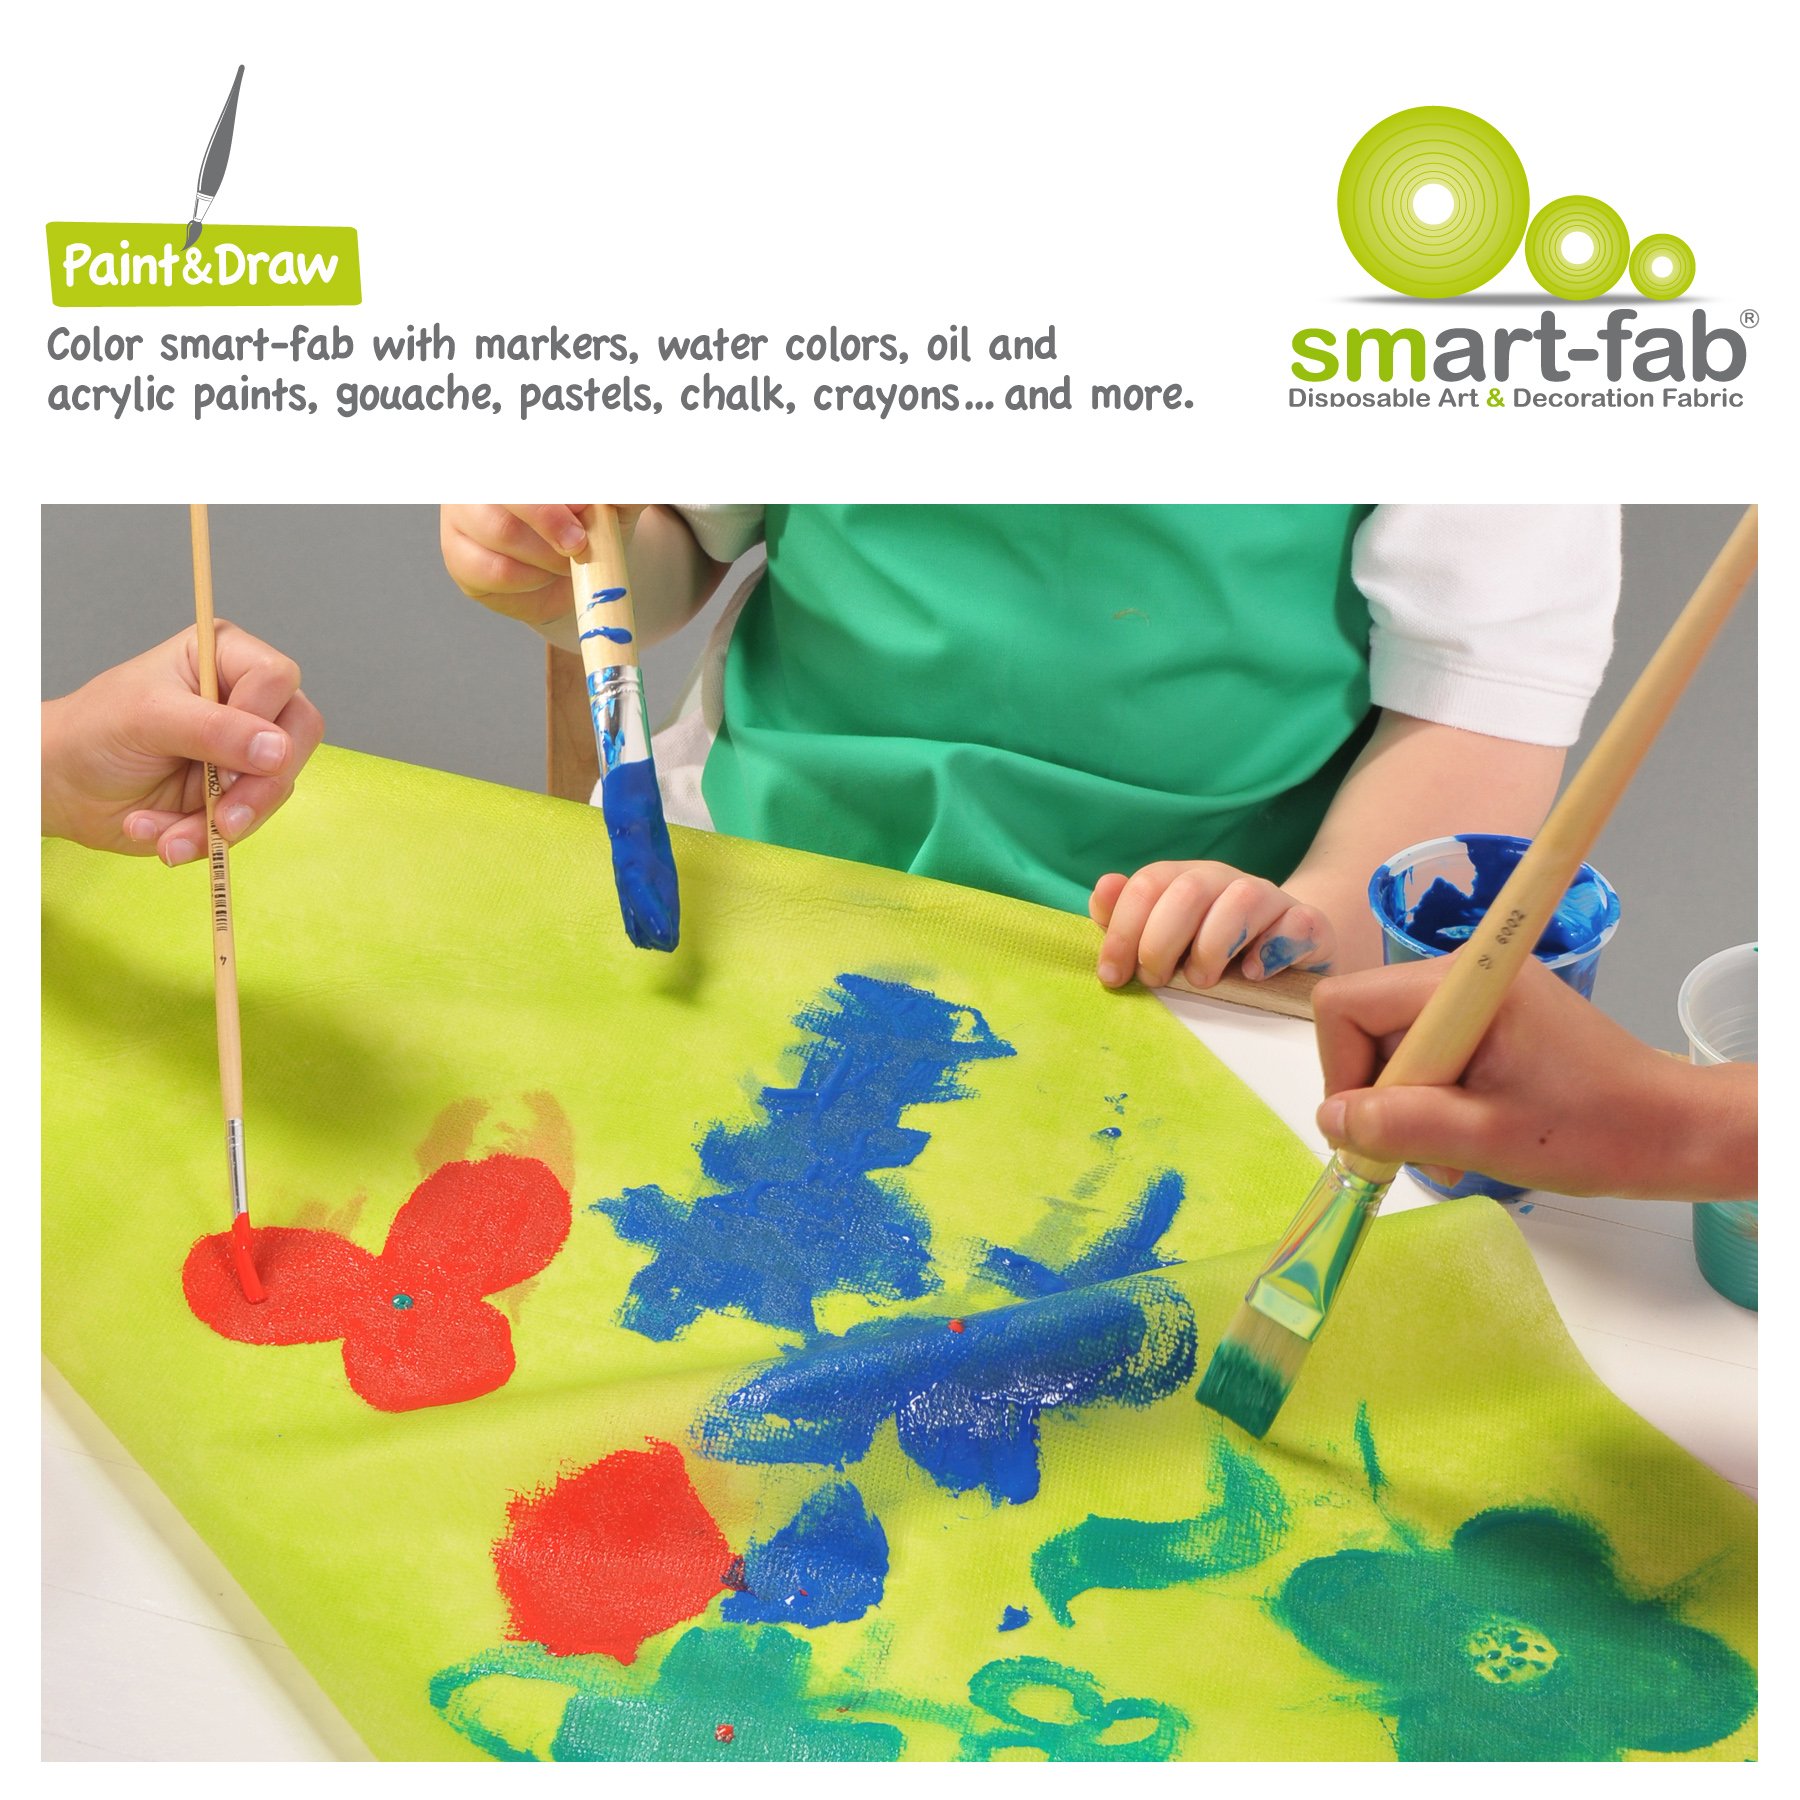 Smart-Fab Disposable Fabric, 12 x 18 Sheets, Assorted, 270/Pack, Perfect for Schools, Classrooms, Crafts, Art, Bulletin Boards, Sew, Draw, Paint it, Unique Non Woven Material (SFB238121827099)